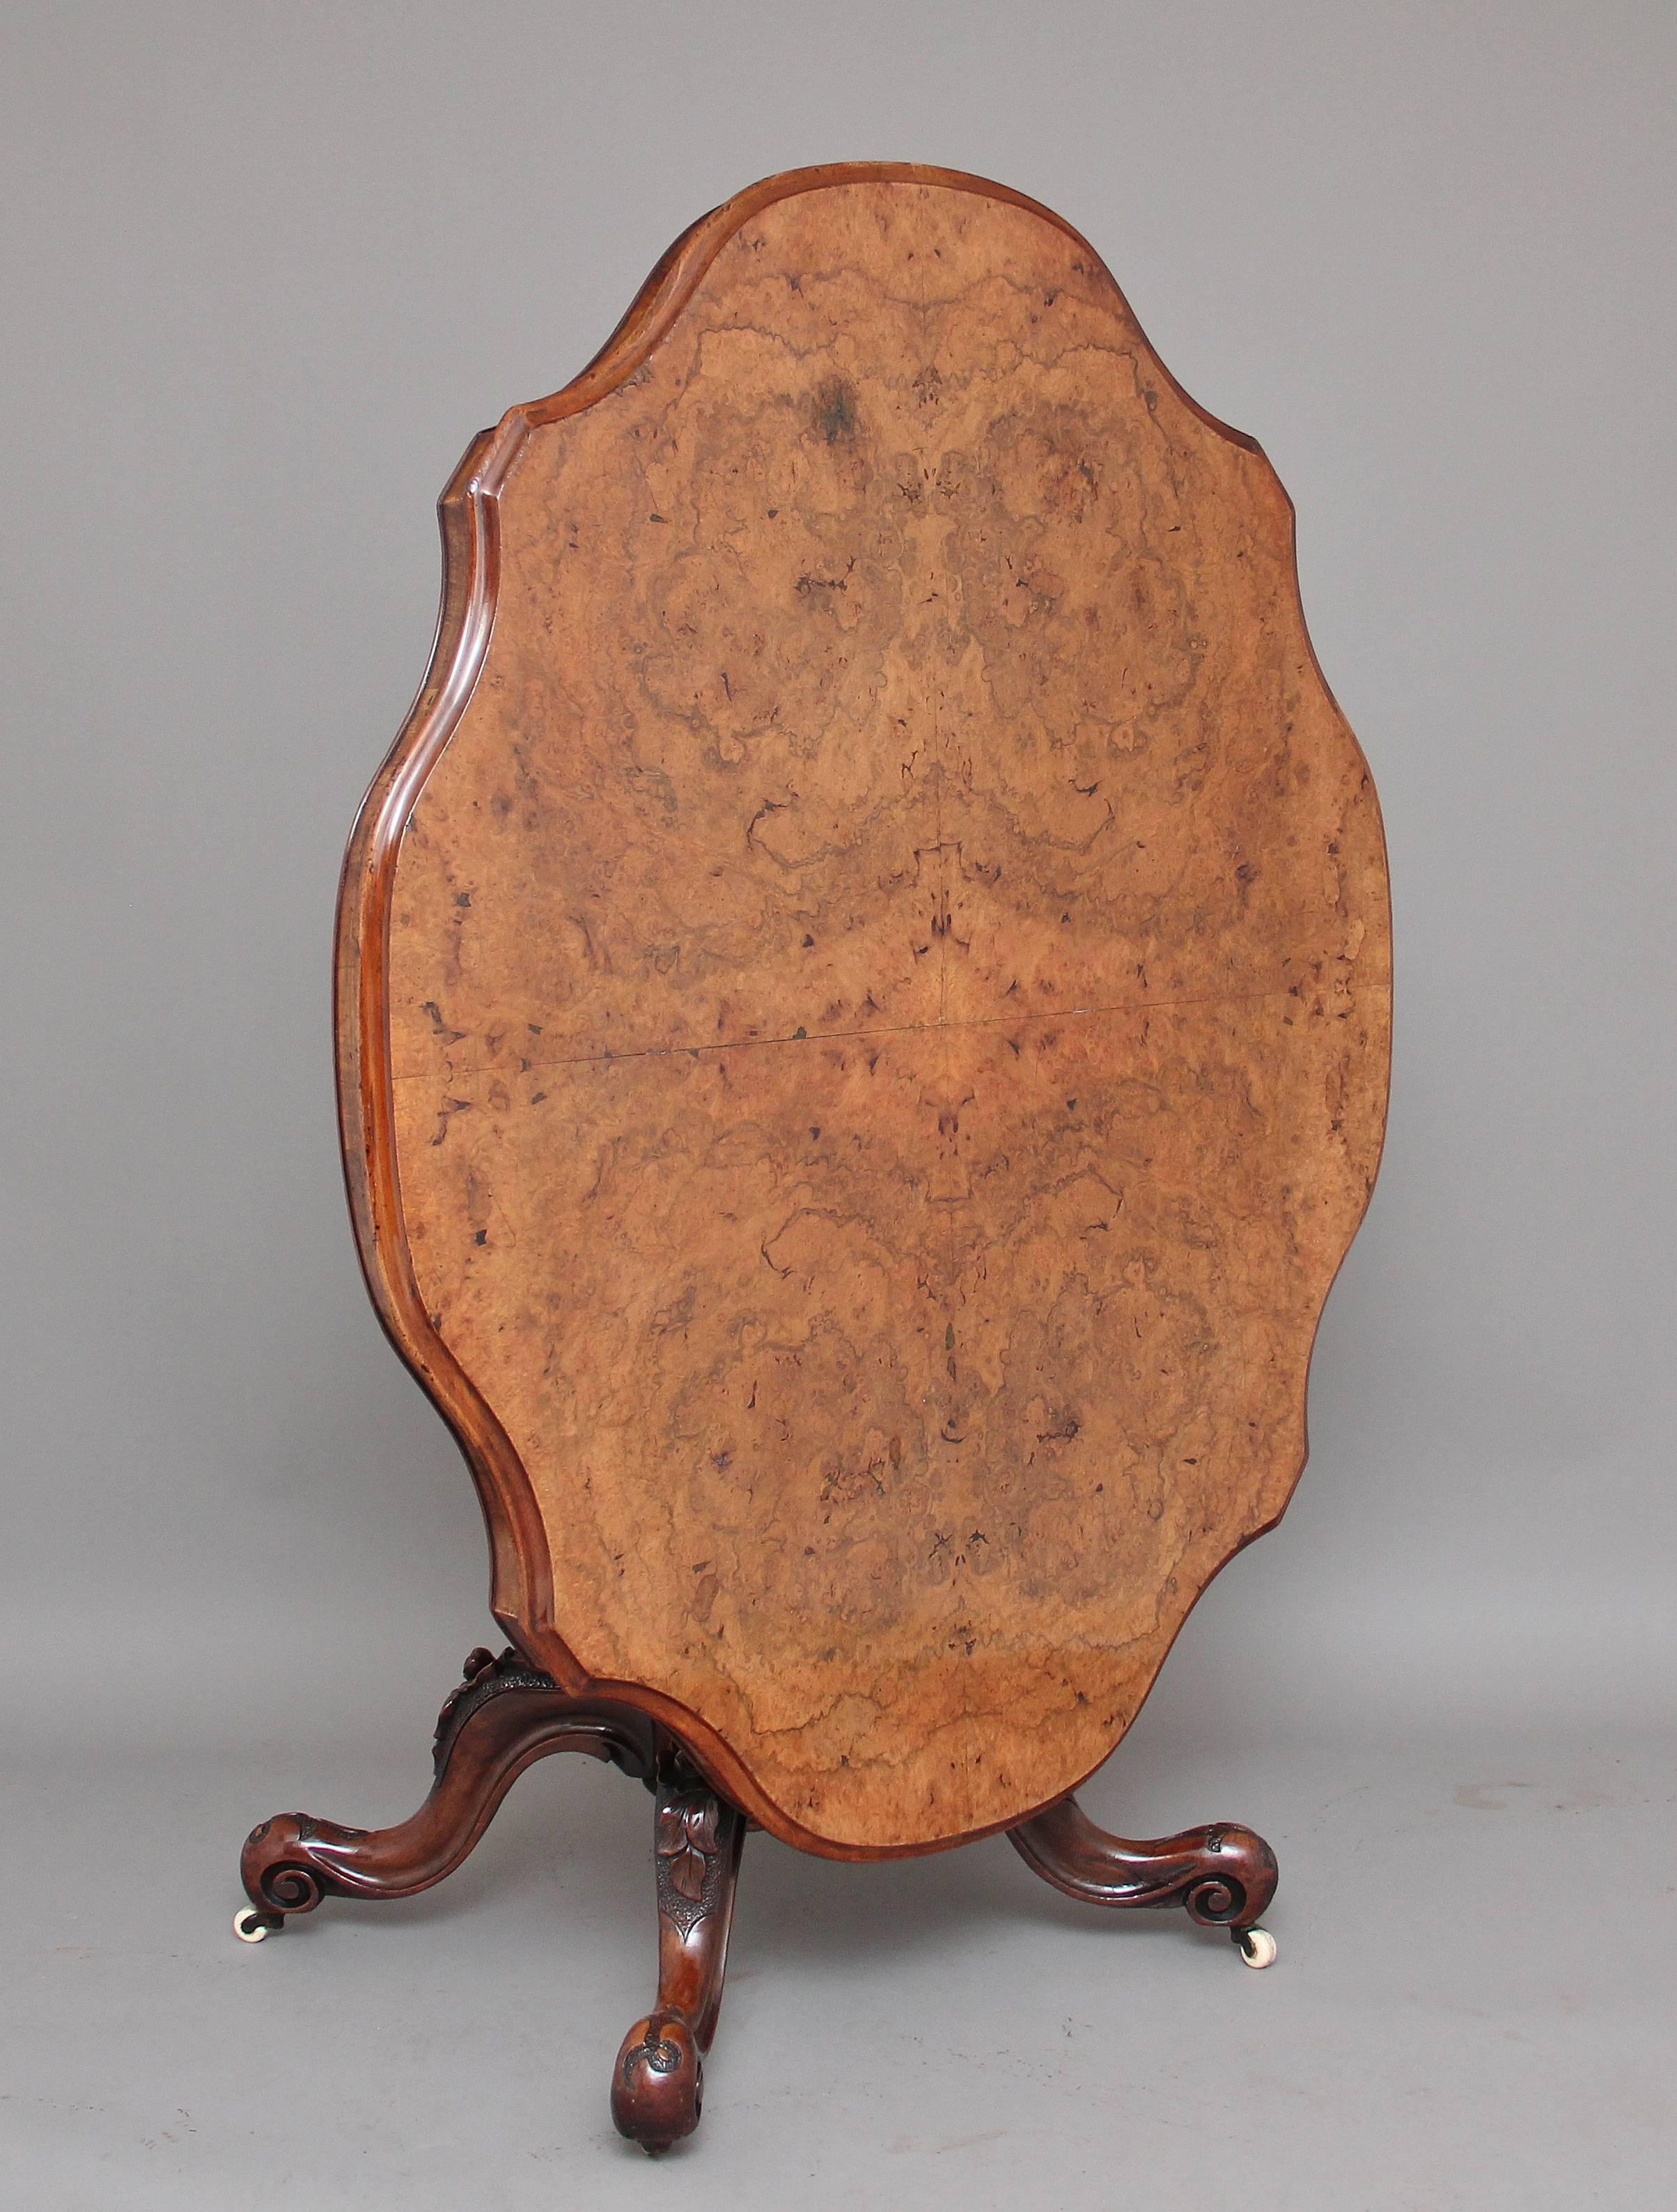 19th century Victorian walnut loo / breakfast table, the shaped four quarter veneered oval tilt top having a moulded edge and nice shaped frieze, supported on a bold column with four stamped and carved cabriole legs, lovely carved floral decoration